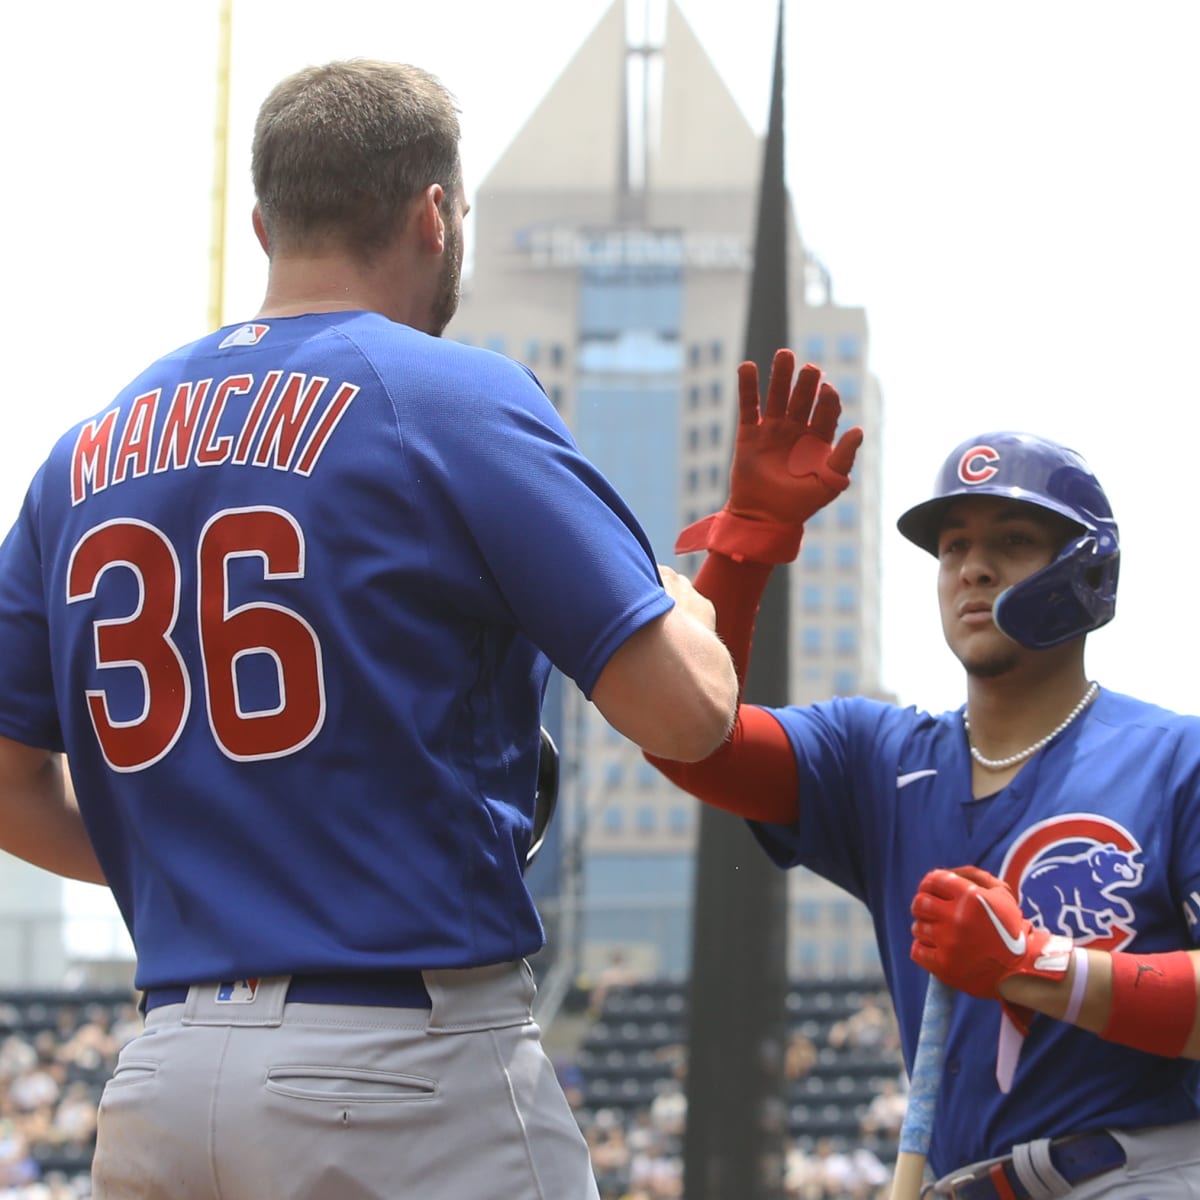 Chicago Cubs first baseman Trey Mancini (36) bats in the top of